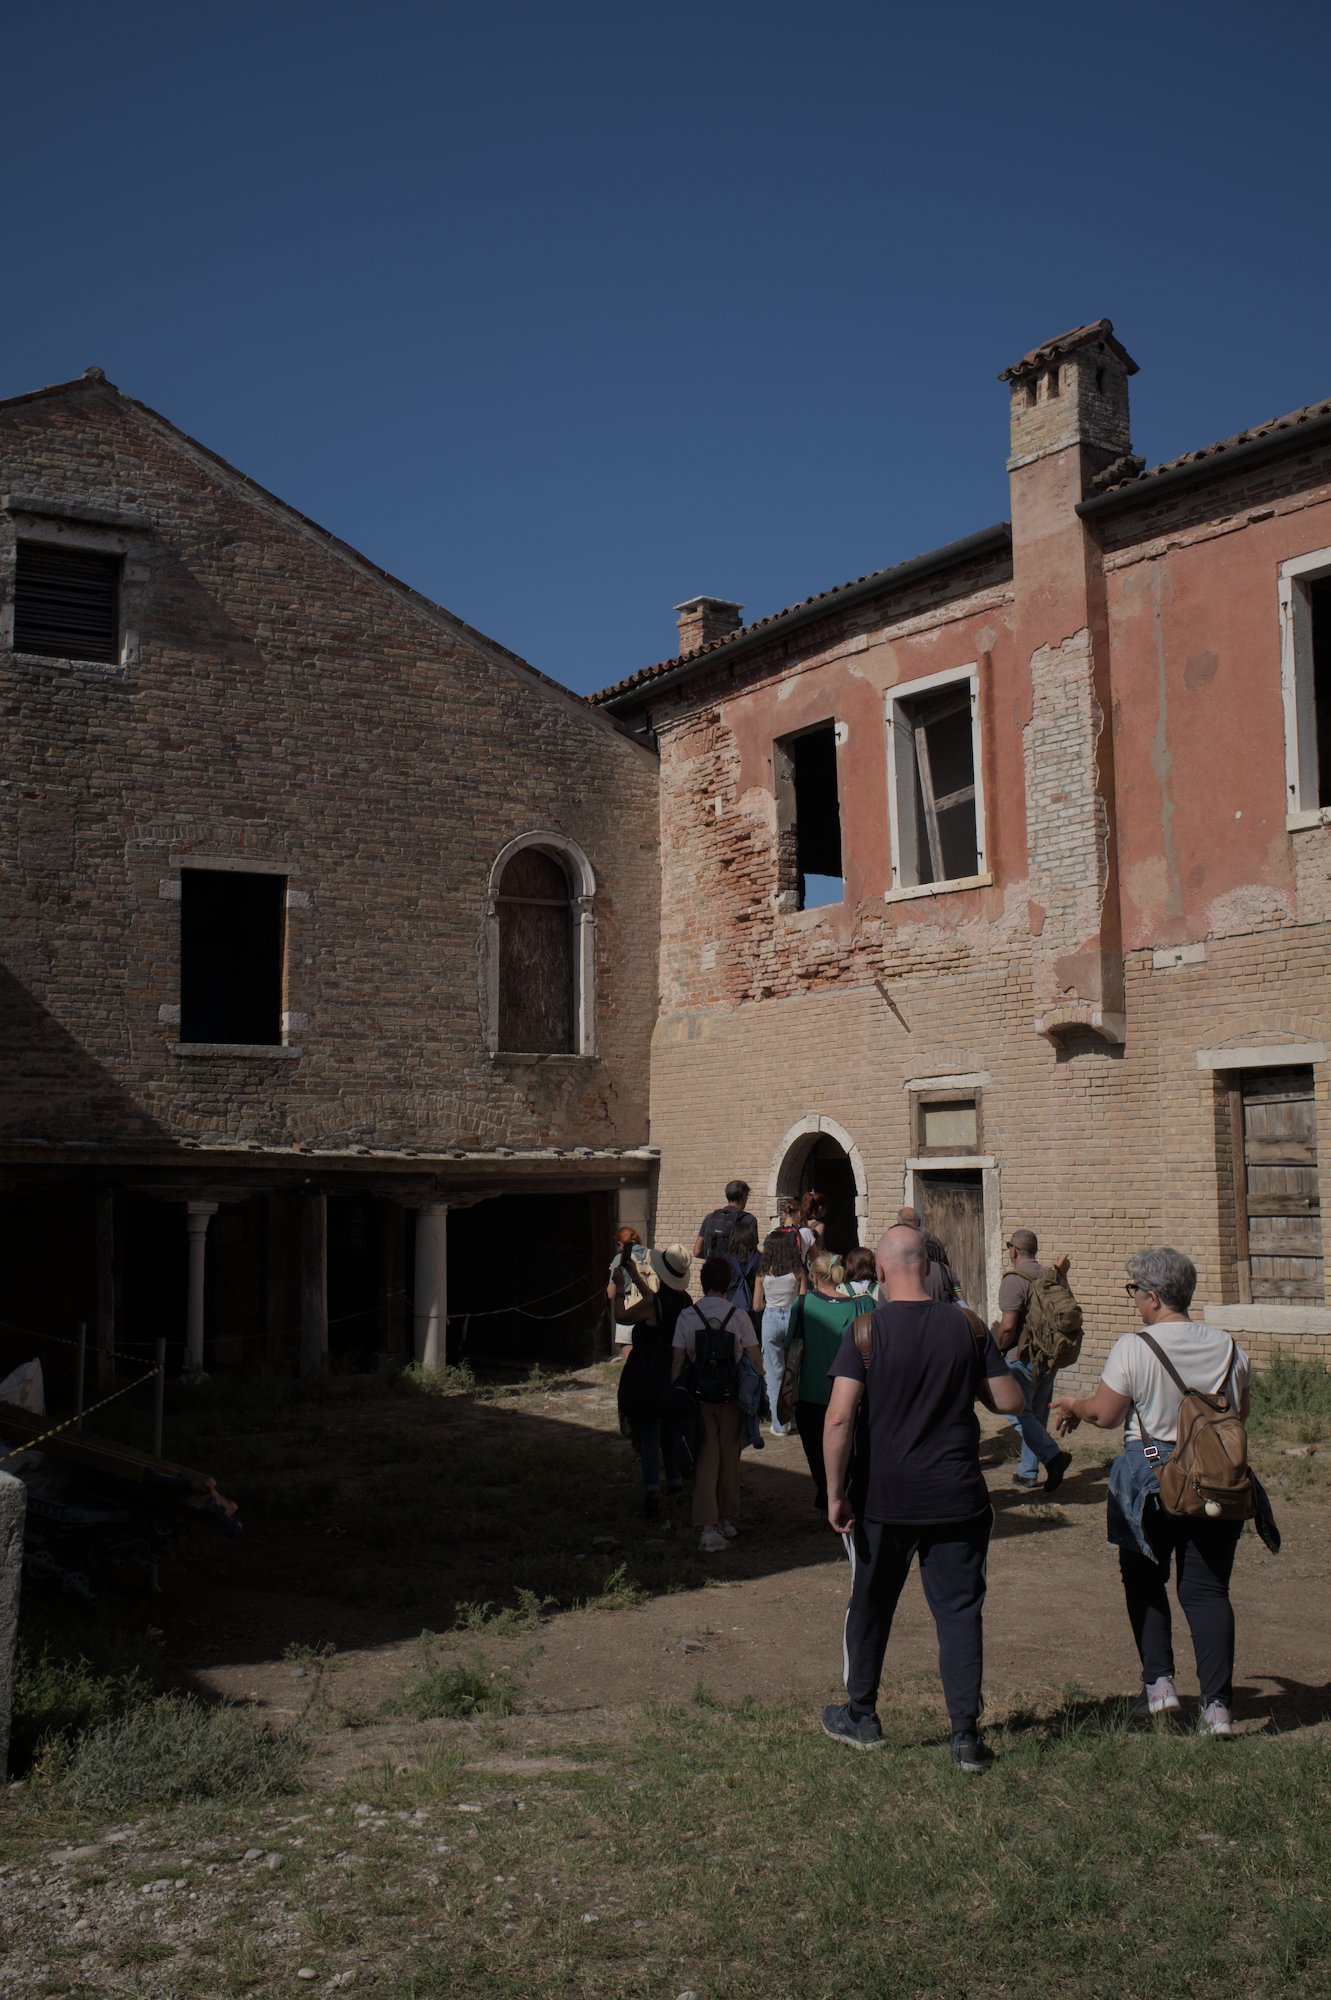 Visitors in the courtyard of the house the prior of the Lazzaretto Vecchio